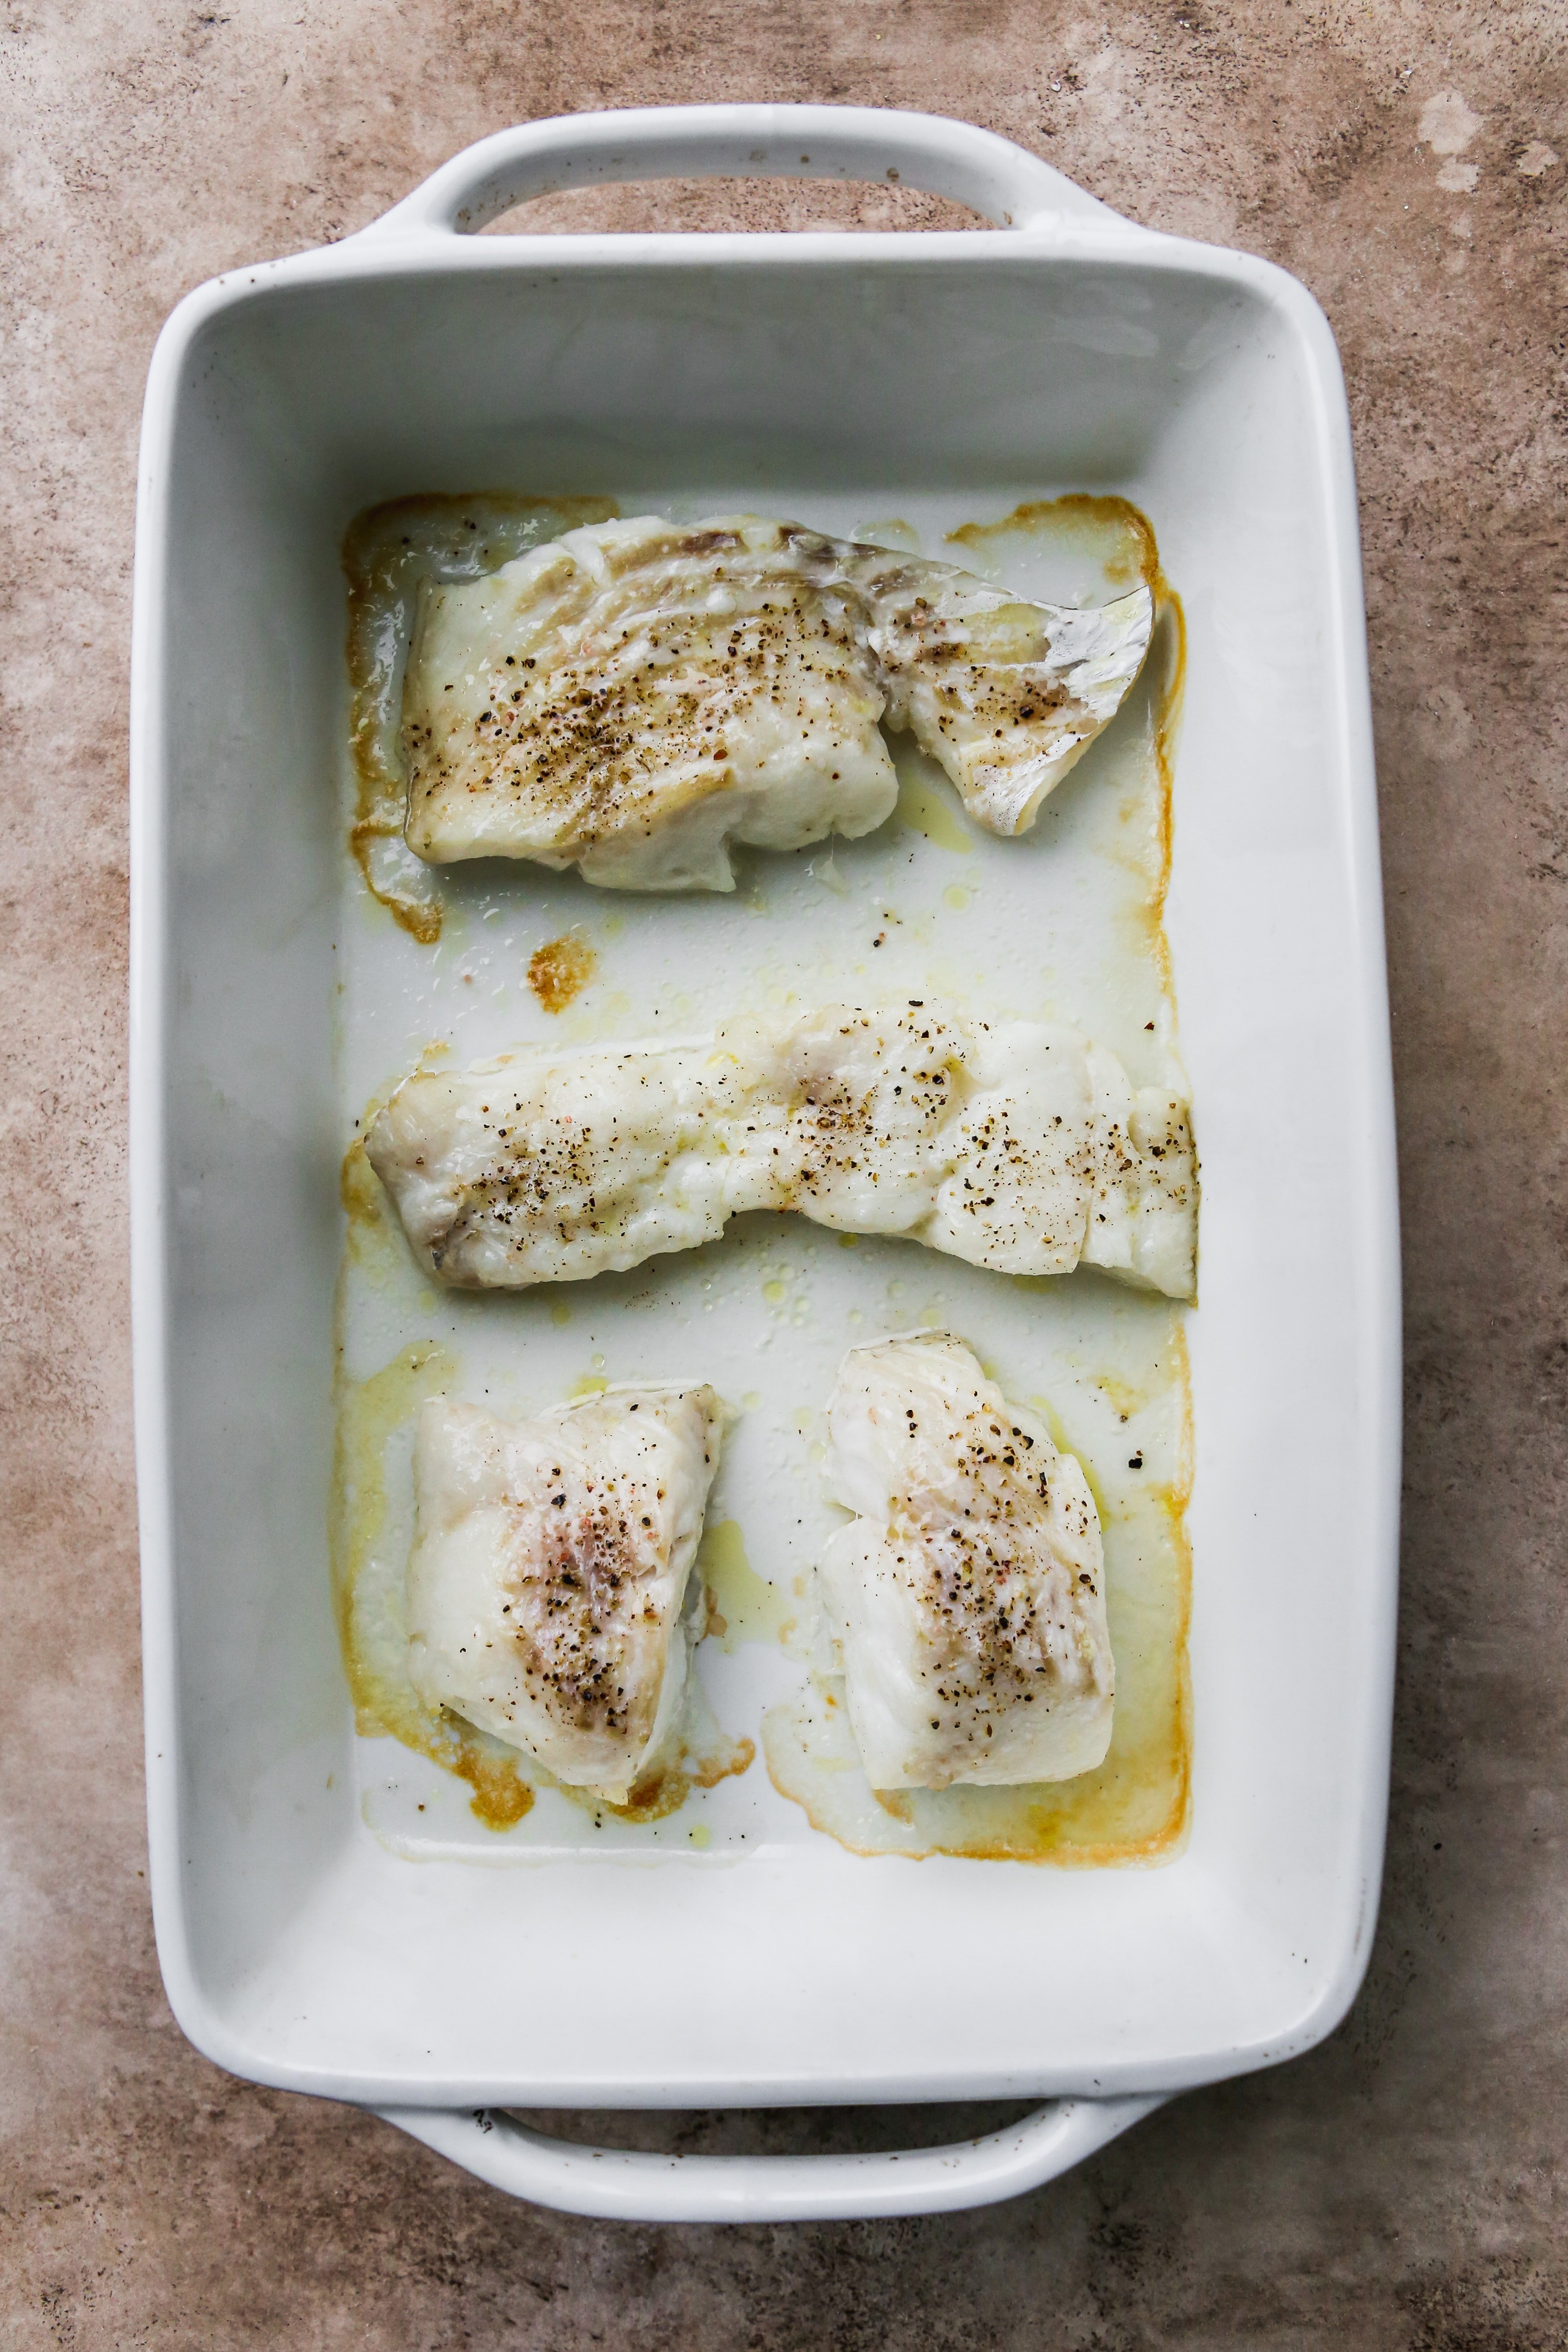 Baked cod fillets in a white baking dish.